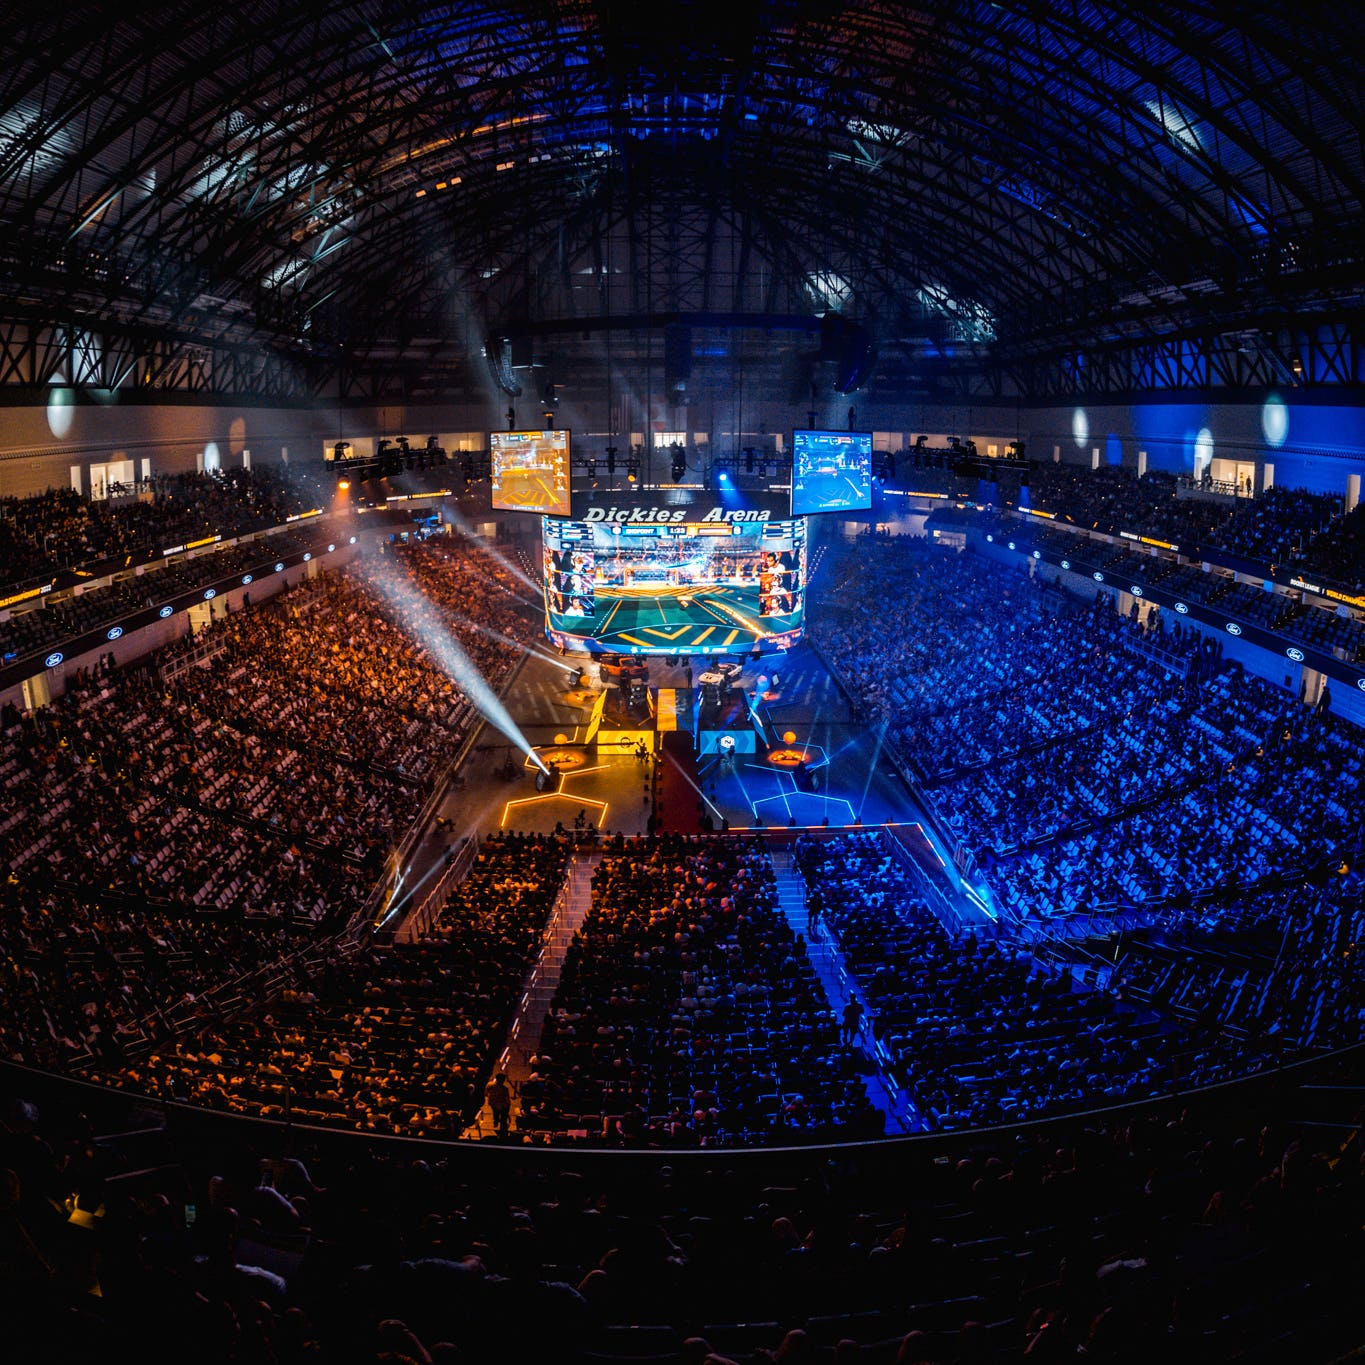 WePlay Esports enters Rocket League with $100,000 tournament - Esports  Insider